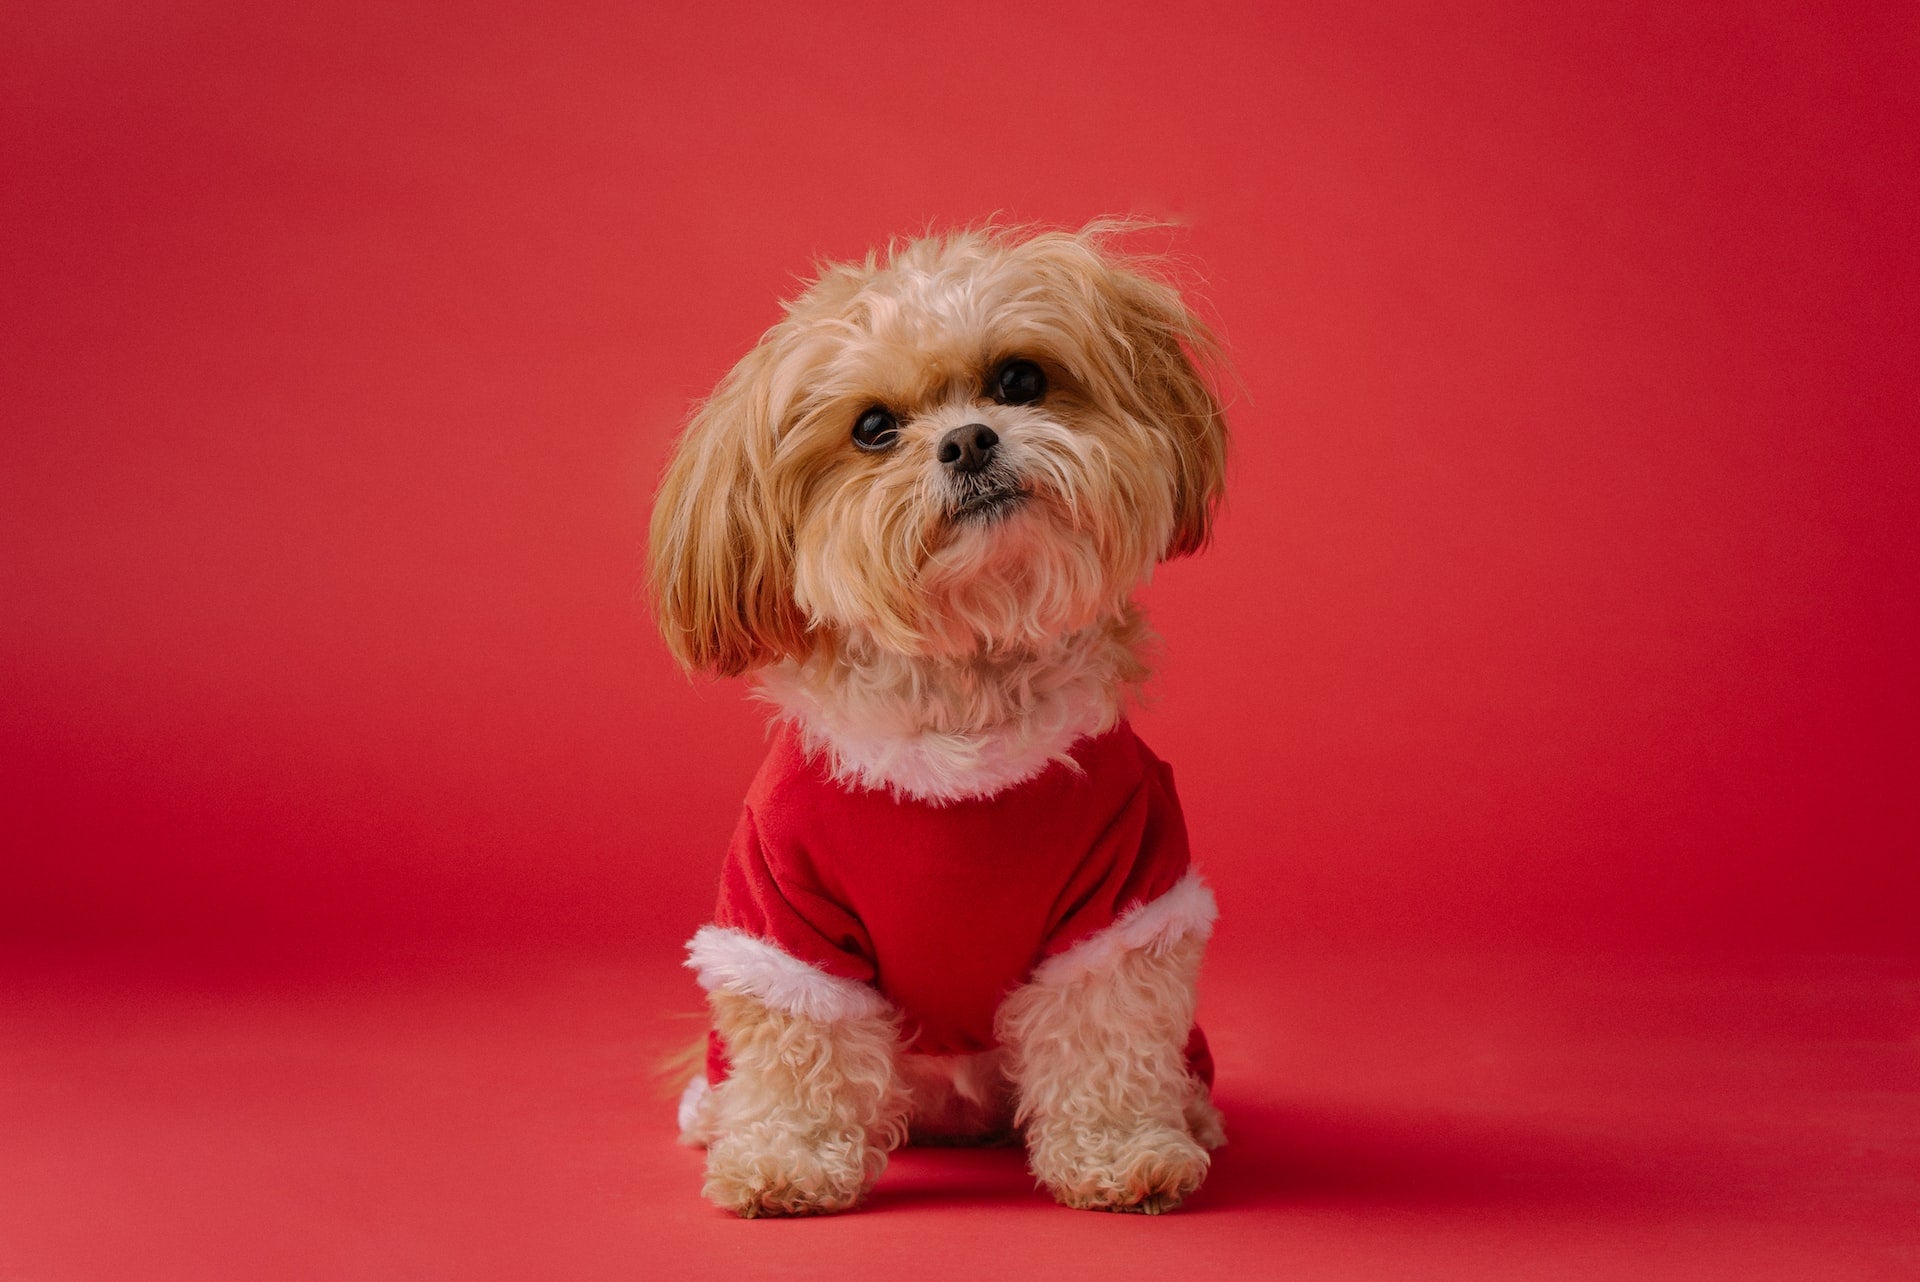 Top 5 Dog Clothes: Trends of 2022 - Sweaters for dogs - Woof